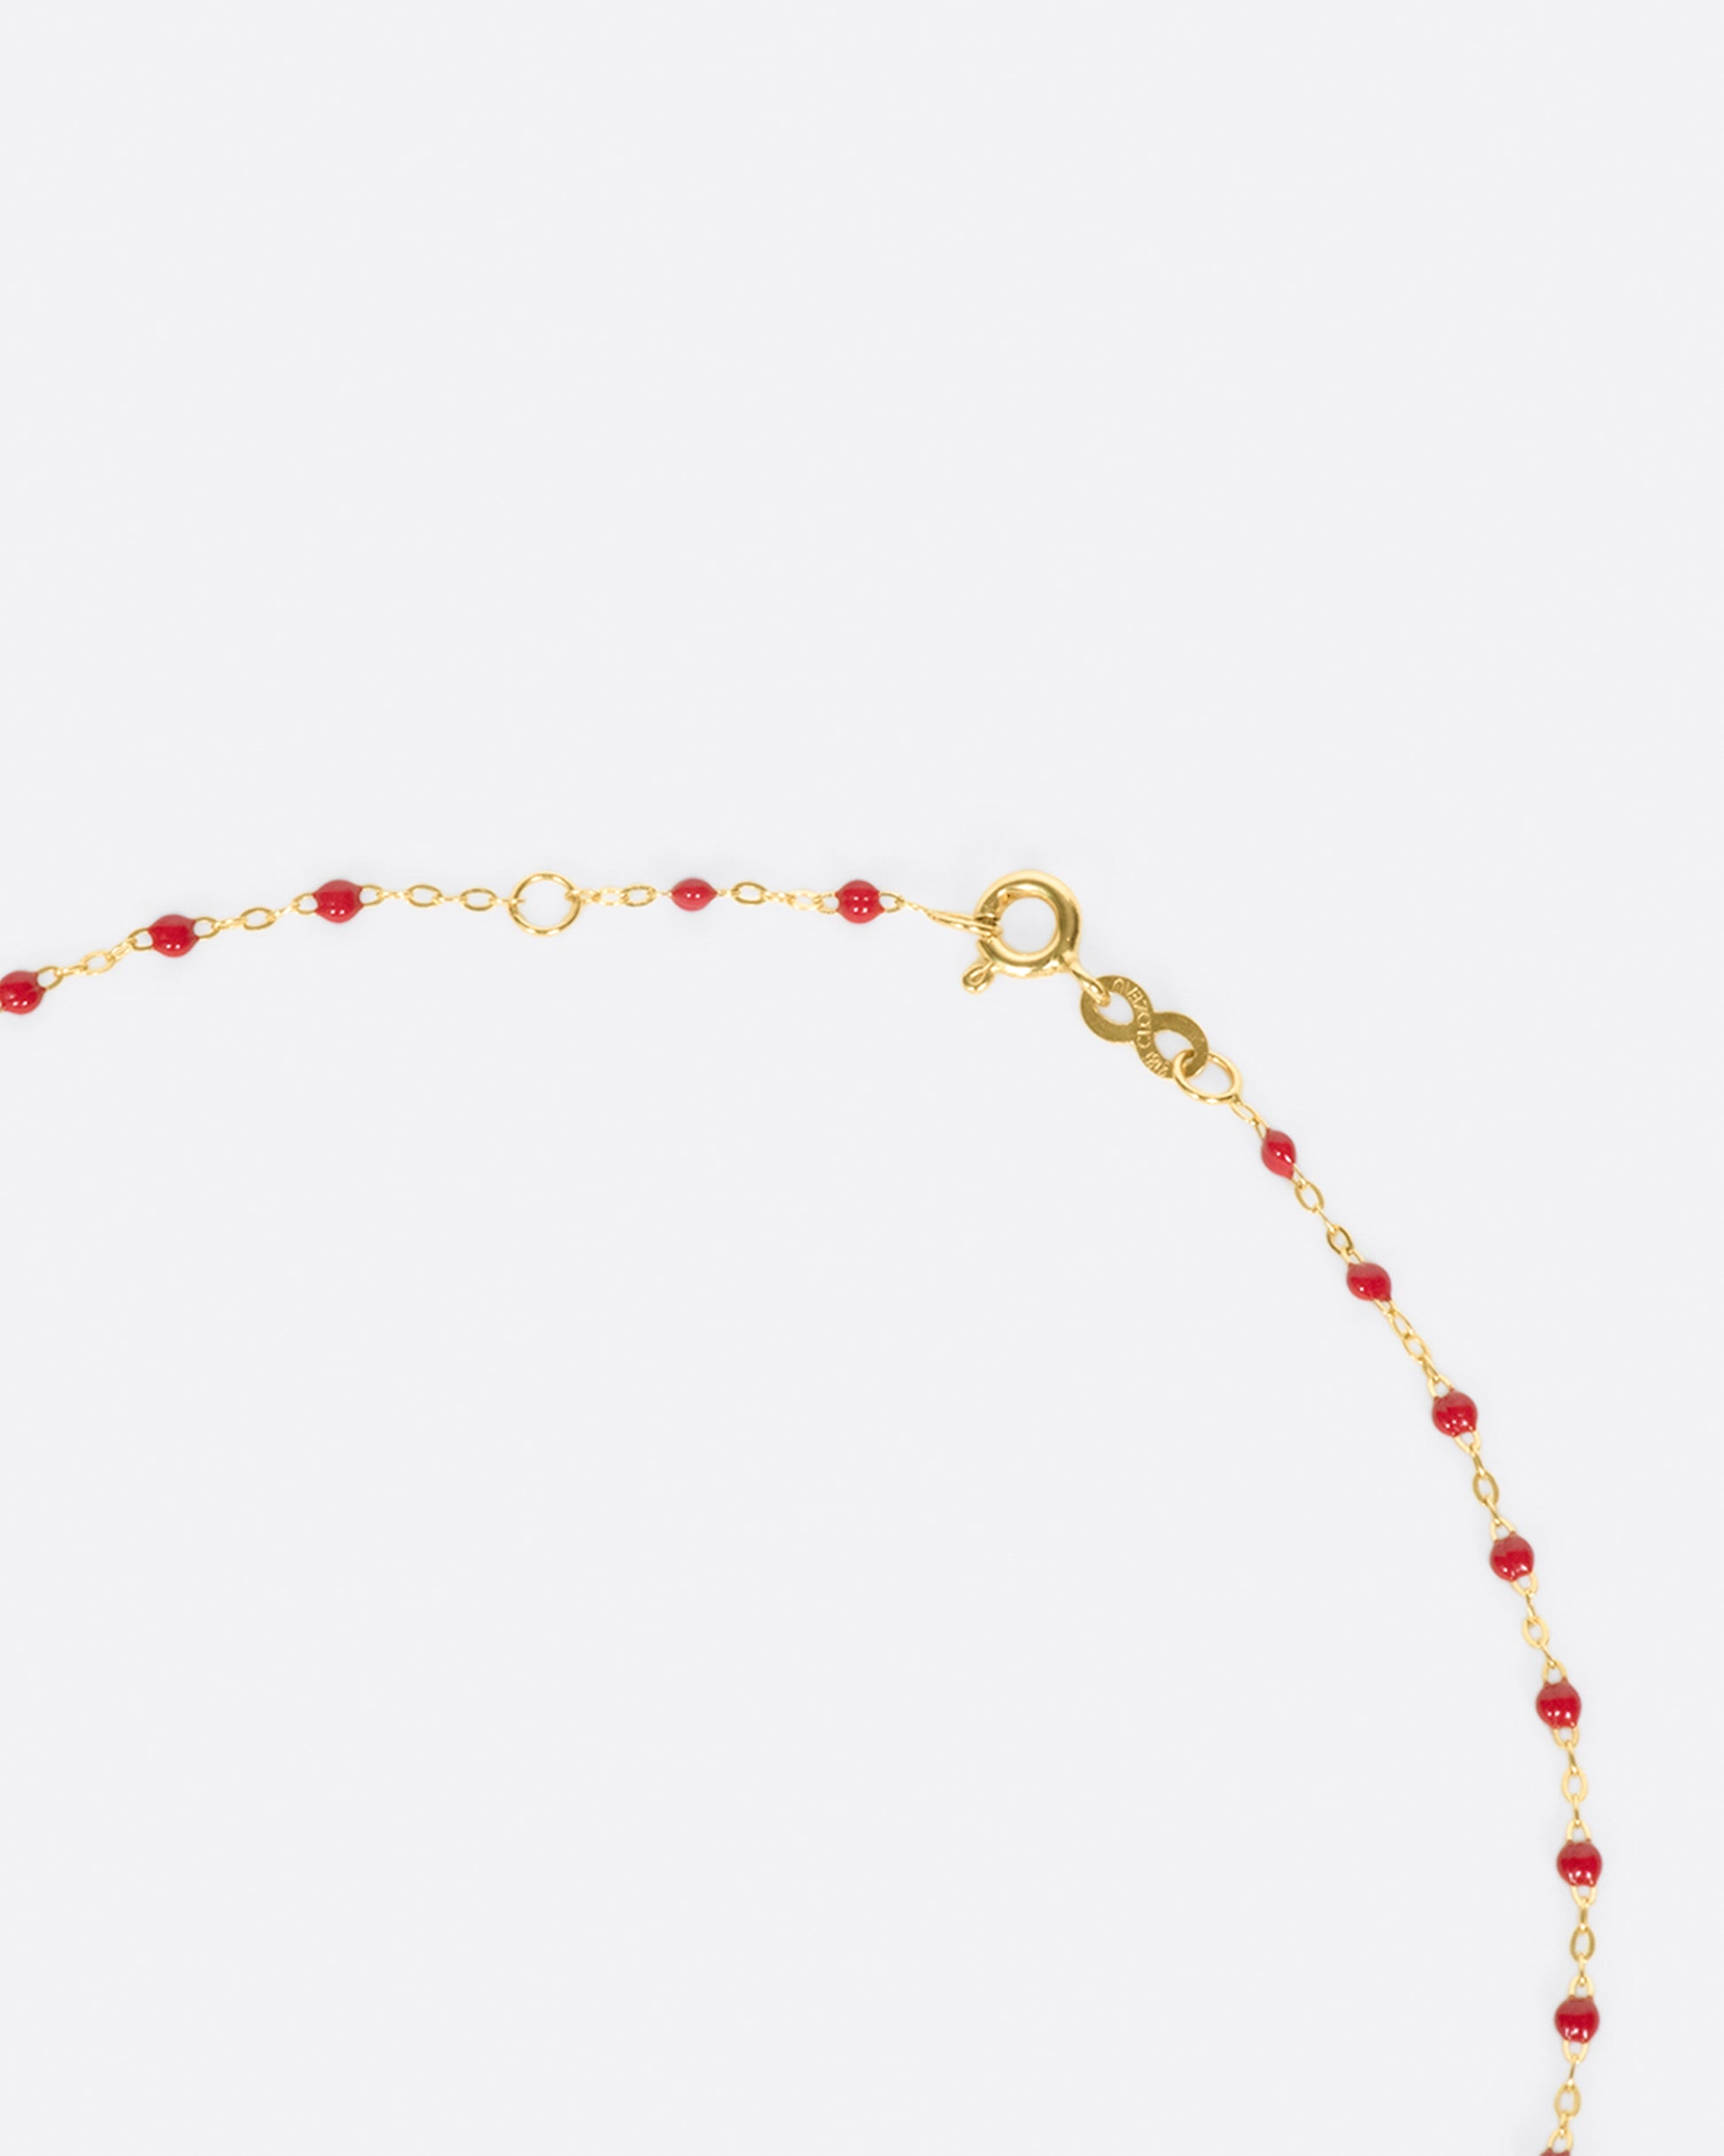 A thin yellow gold chain necklace with resin beads. Each necklace is hand dipped in melted resin to create the beaded effect. 